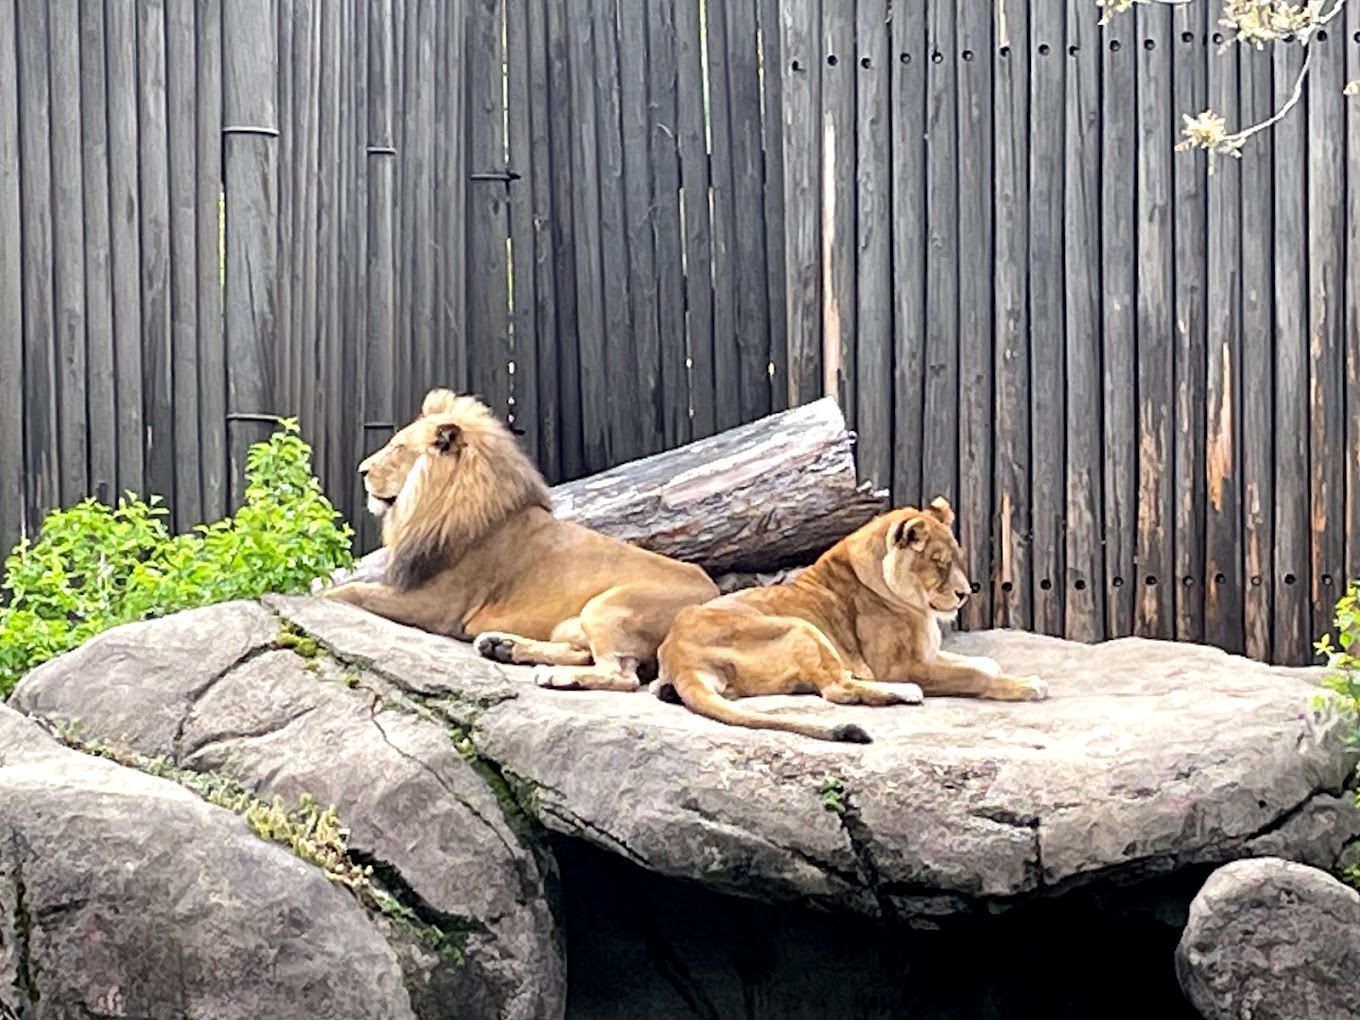 Cleveland Metroparks Zoo Travel | Zoo and Wildlife Sanctuary 